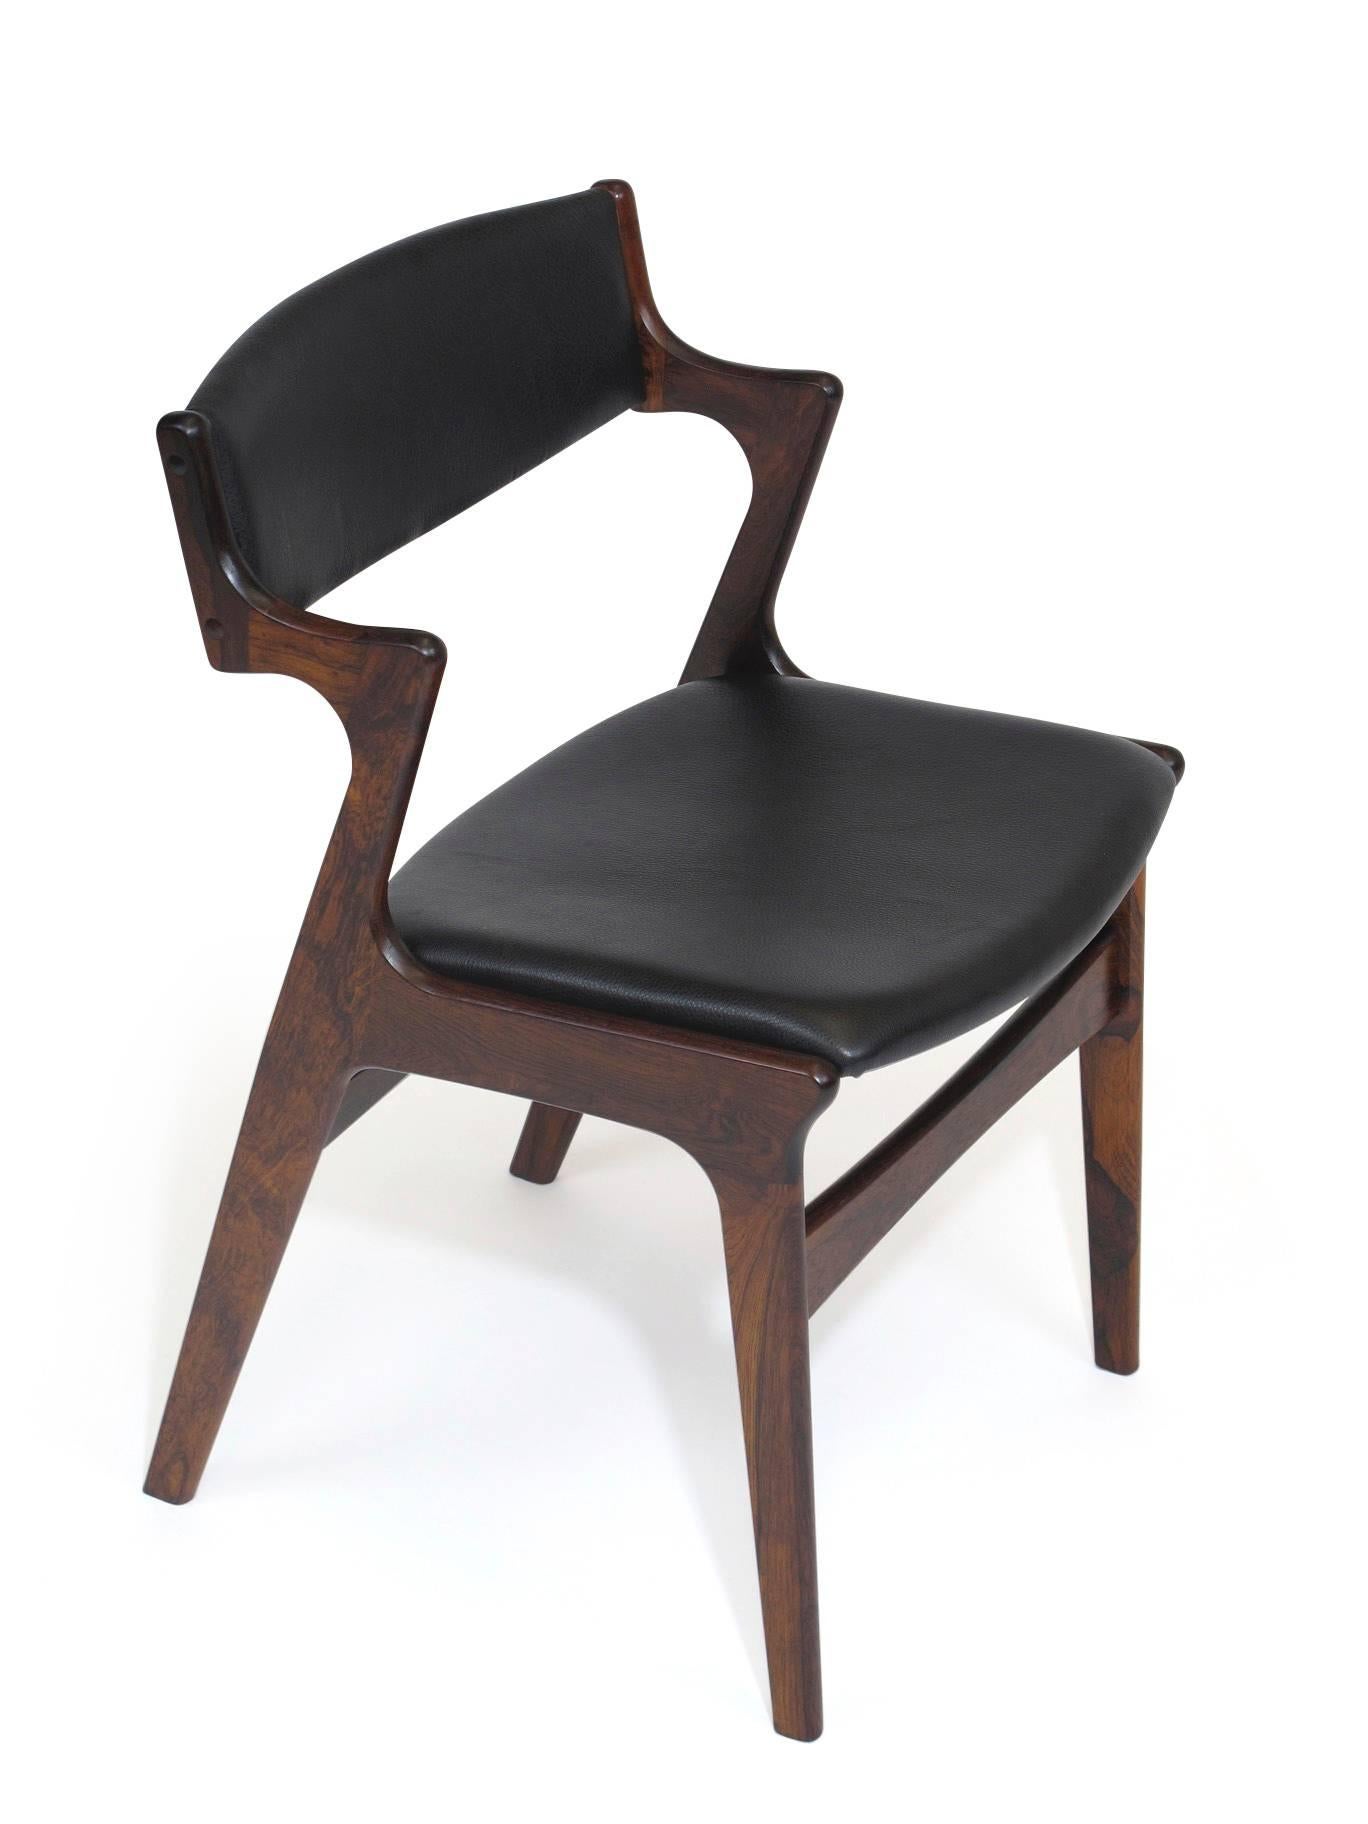 Mid-Century rosewood dining chairs manufactured by Nova Møbelfabrik, Denmark. The chairs feature solid rosewood frames with half arms, rich dark grain and exposed finger joinery. Newly upholstered in soft black leather. Fully restored and in an